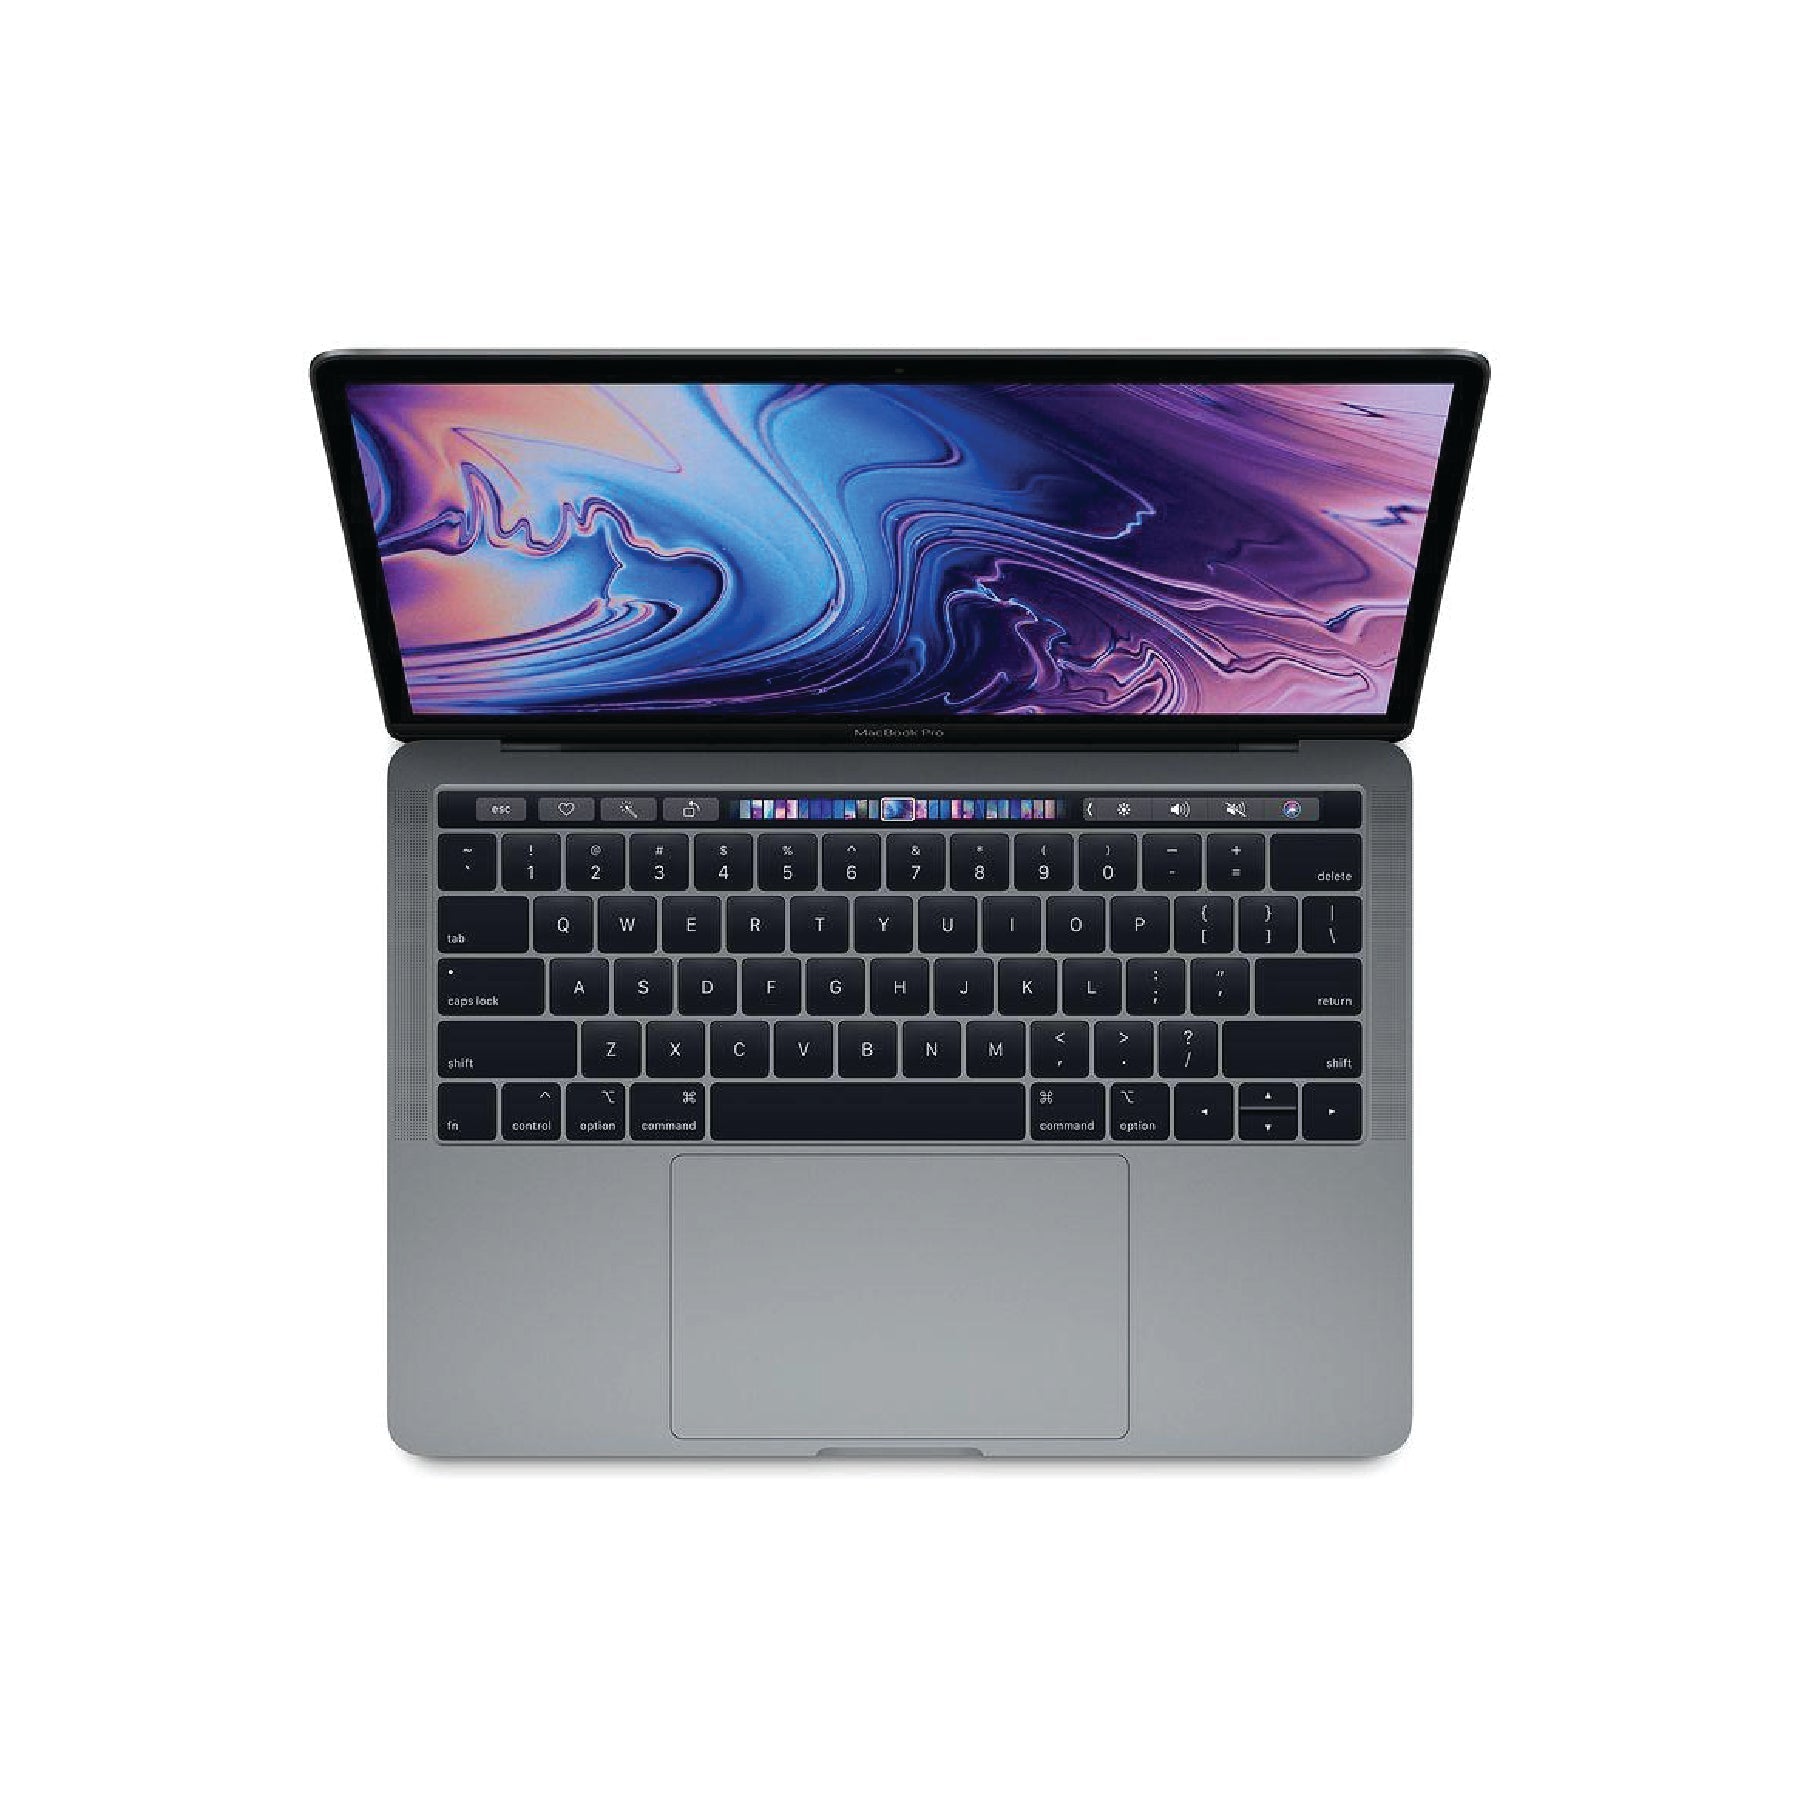 MacBook Pro (13-inch, 2018, Four Thunderbolt 3 ports) 2.3GHz, Intel Core i5 512GB - Space Grey (Good) - iStore Pre-owned